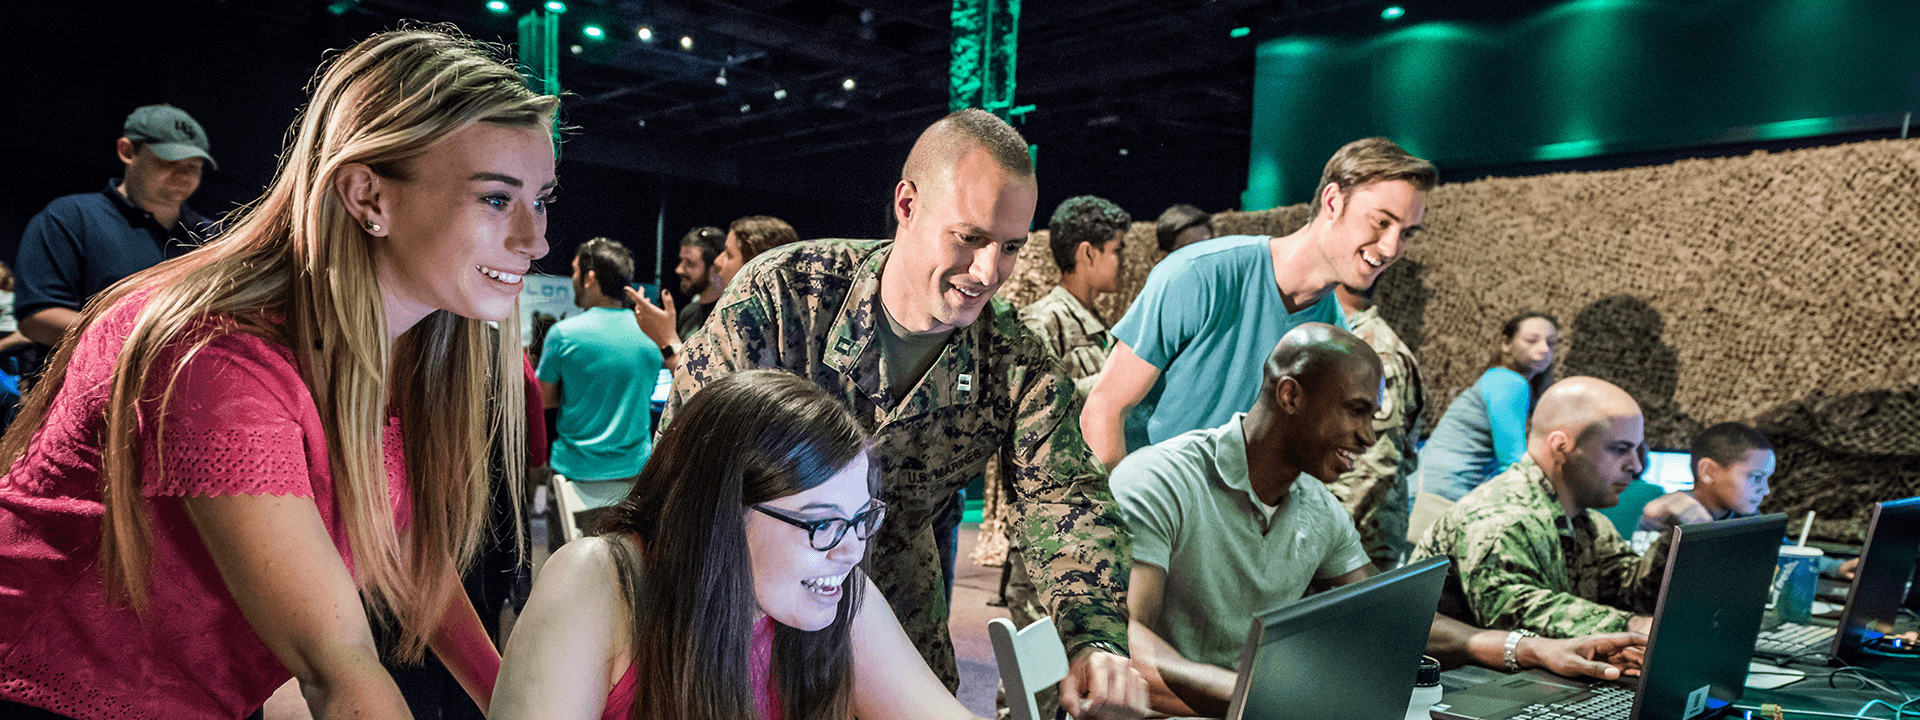 Guests test military simulators at the Otronicon technology event.